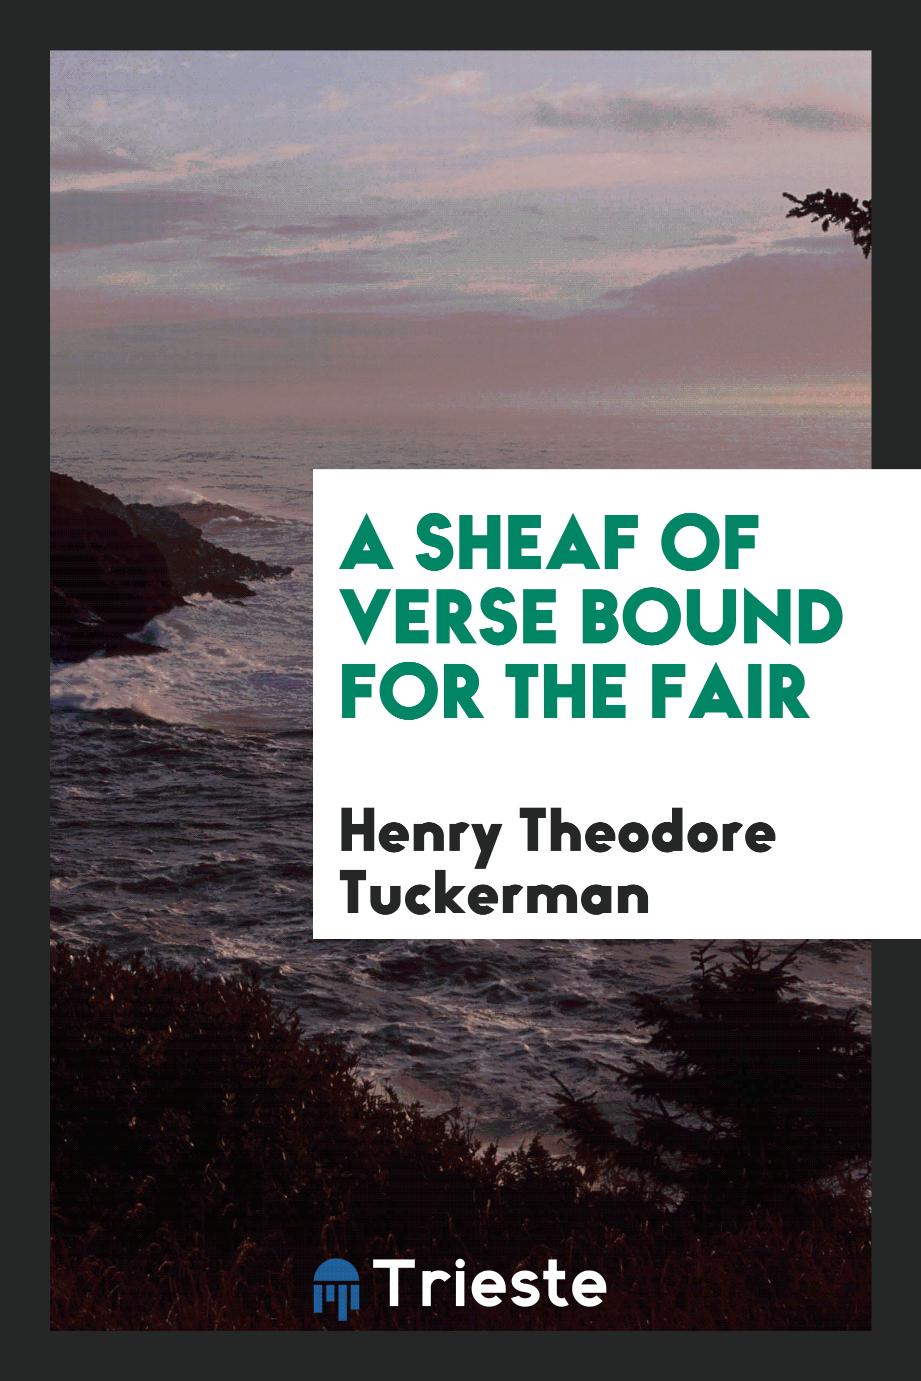 A Sheaf of Verse Bound for the Fair